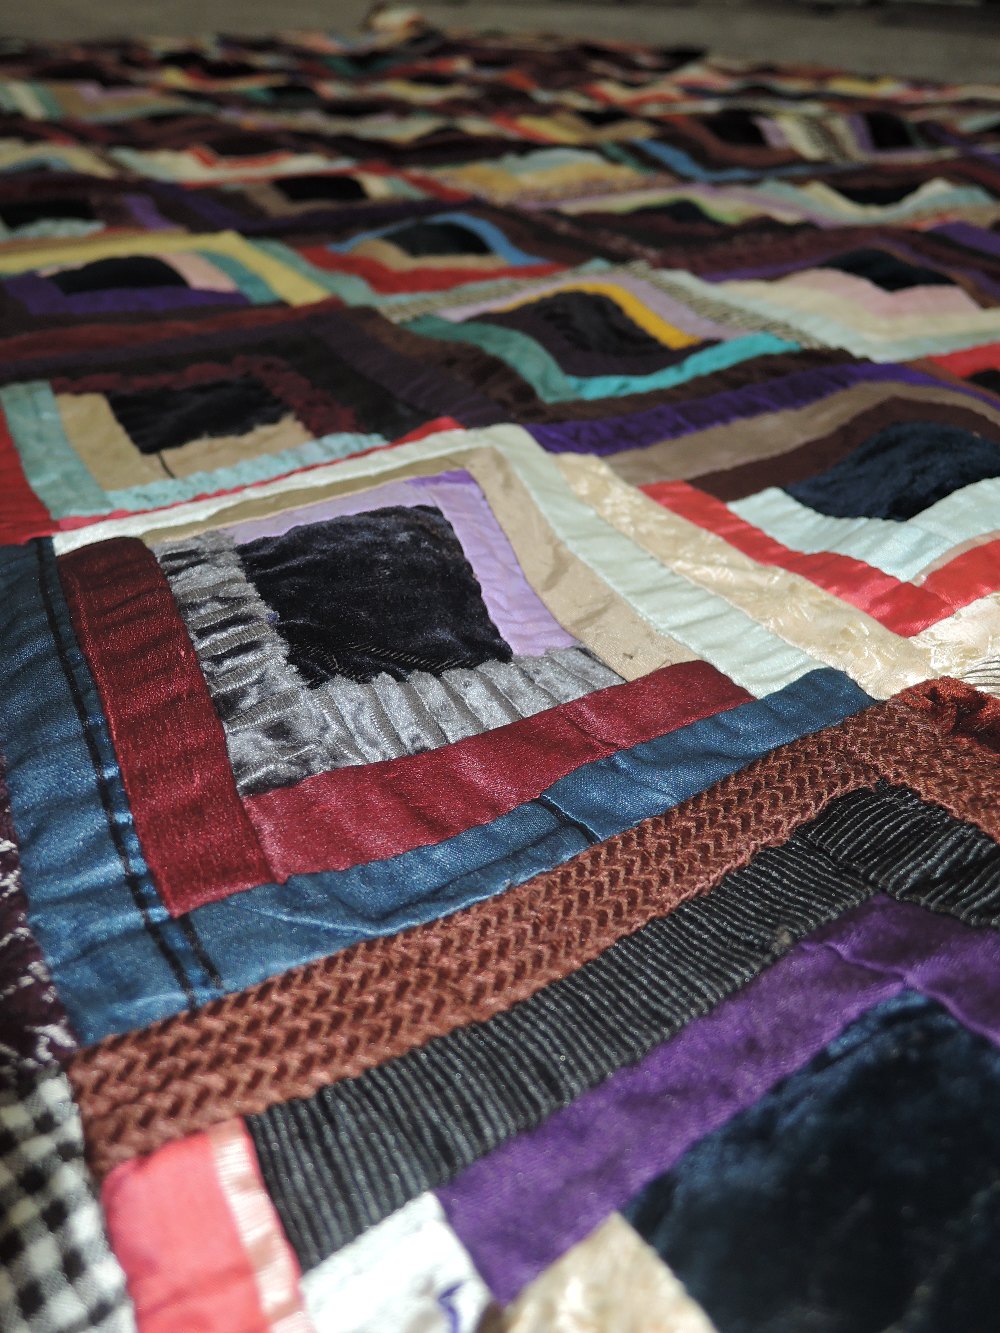 A large log cabin design quilt around mid to late 1800s, using vibrant silks,velvets and cottons, - Image 3 of 3